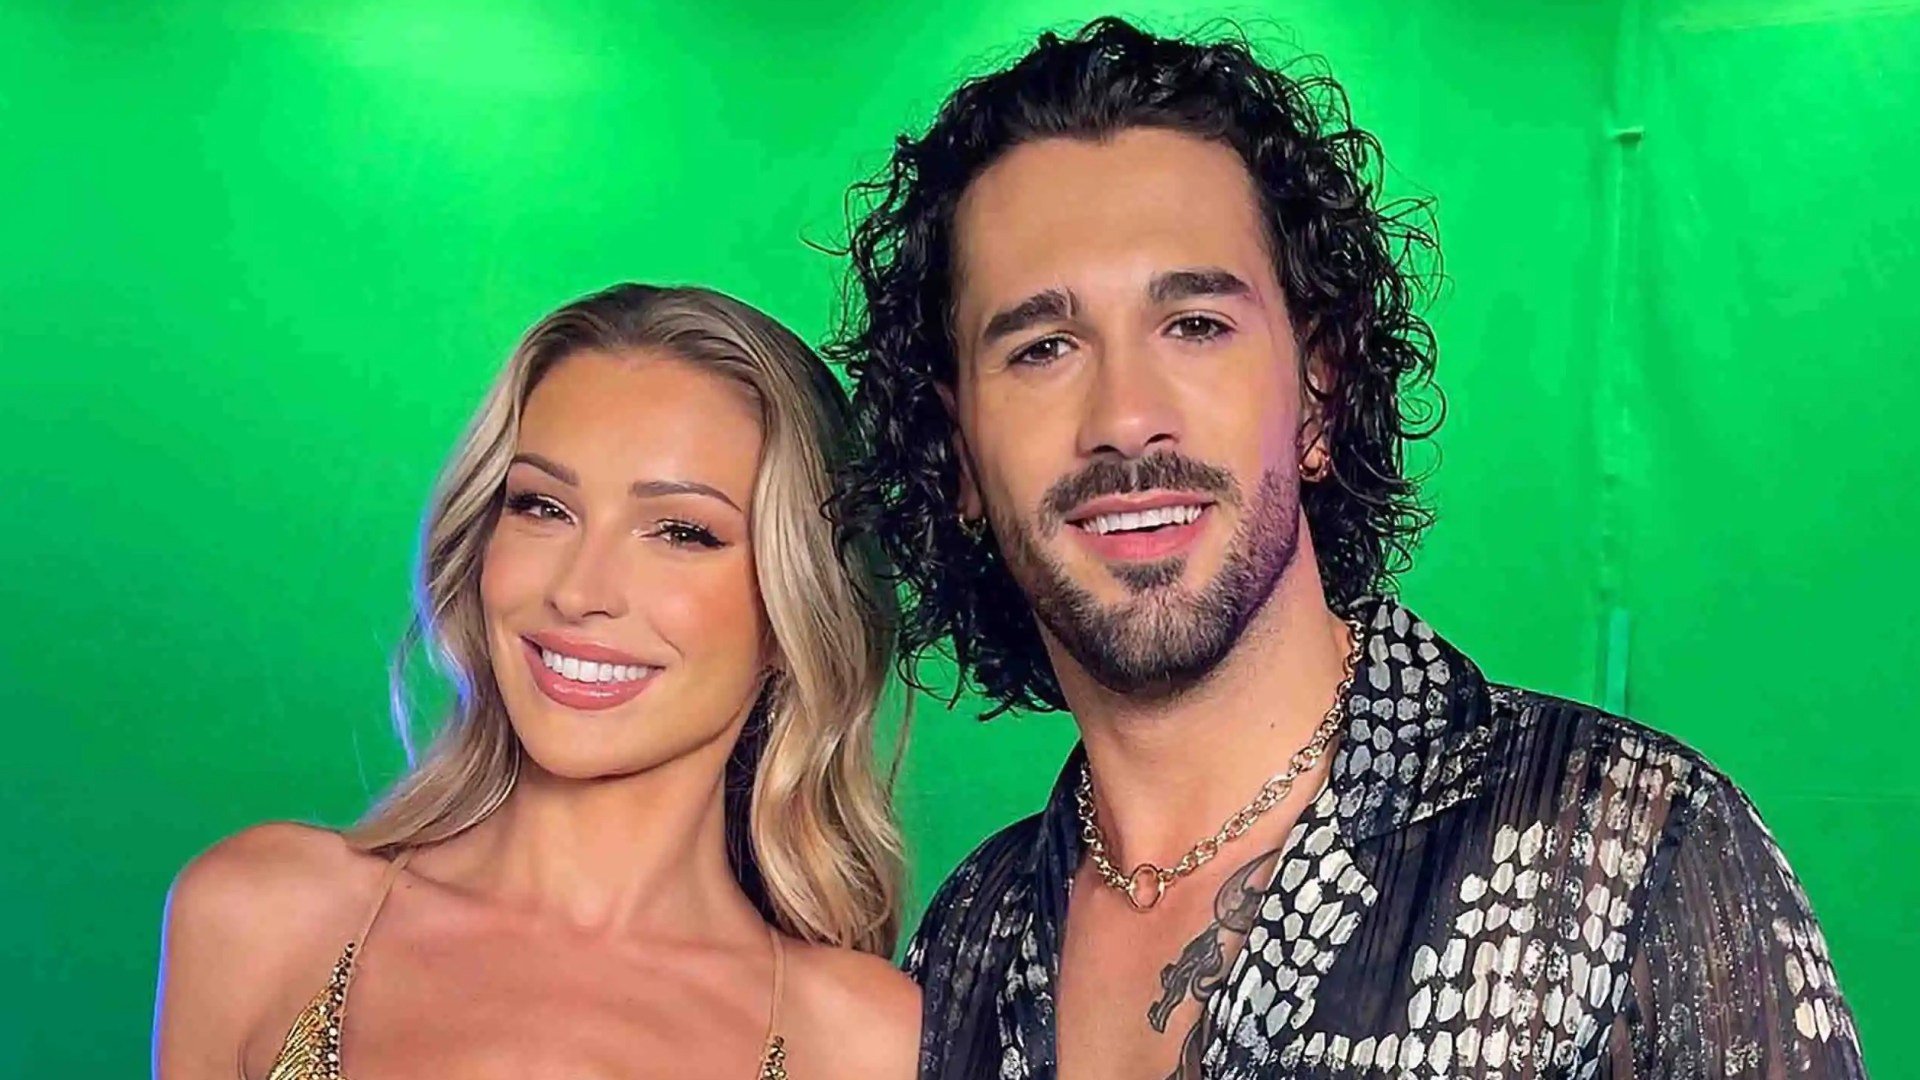 Graziano Di Prima flees the UK to start new life abroad after Strictly sacking for 'hitting and kicking' Zara McDermott